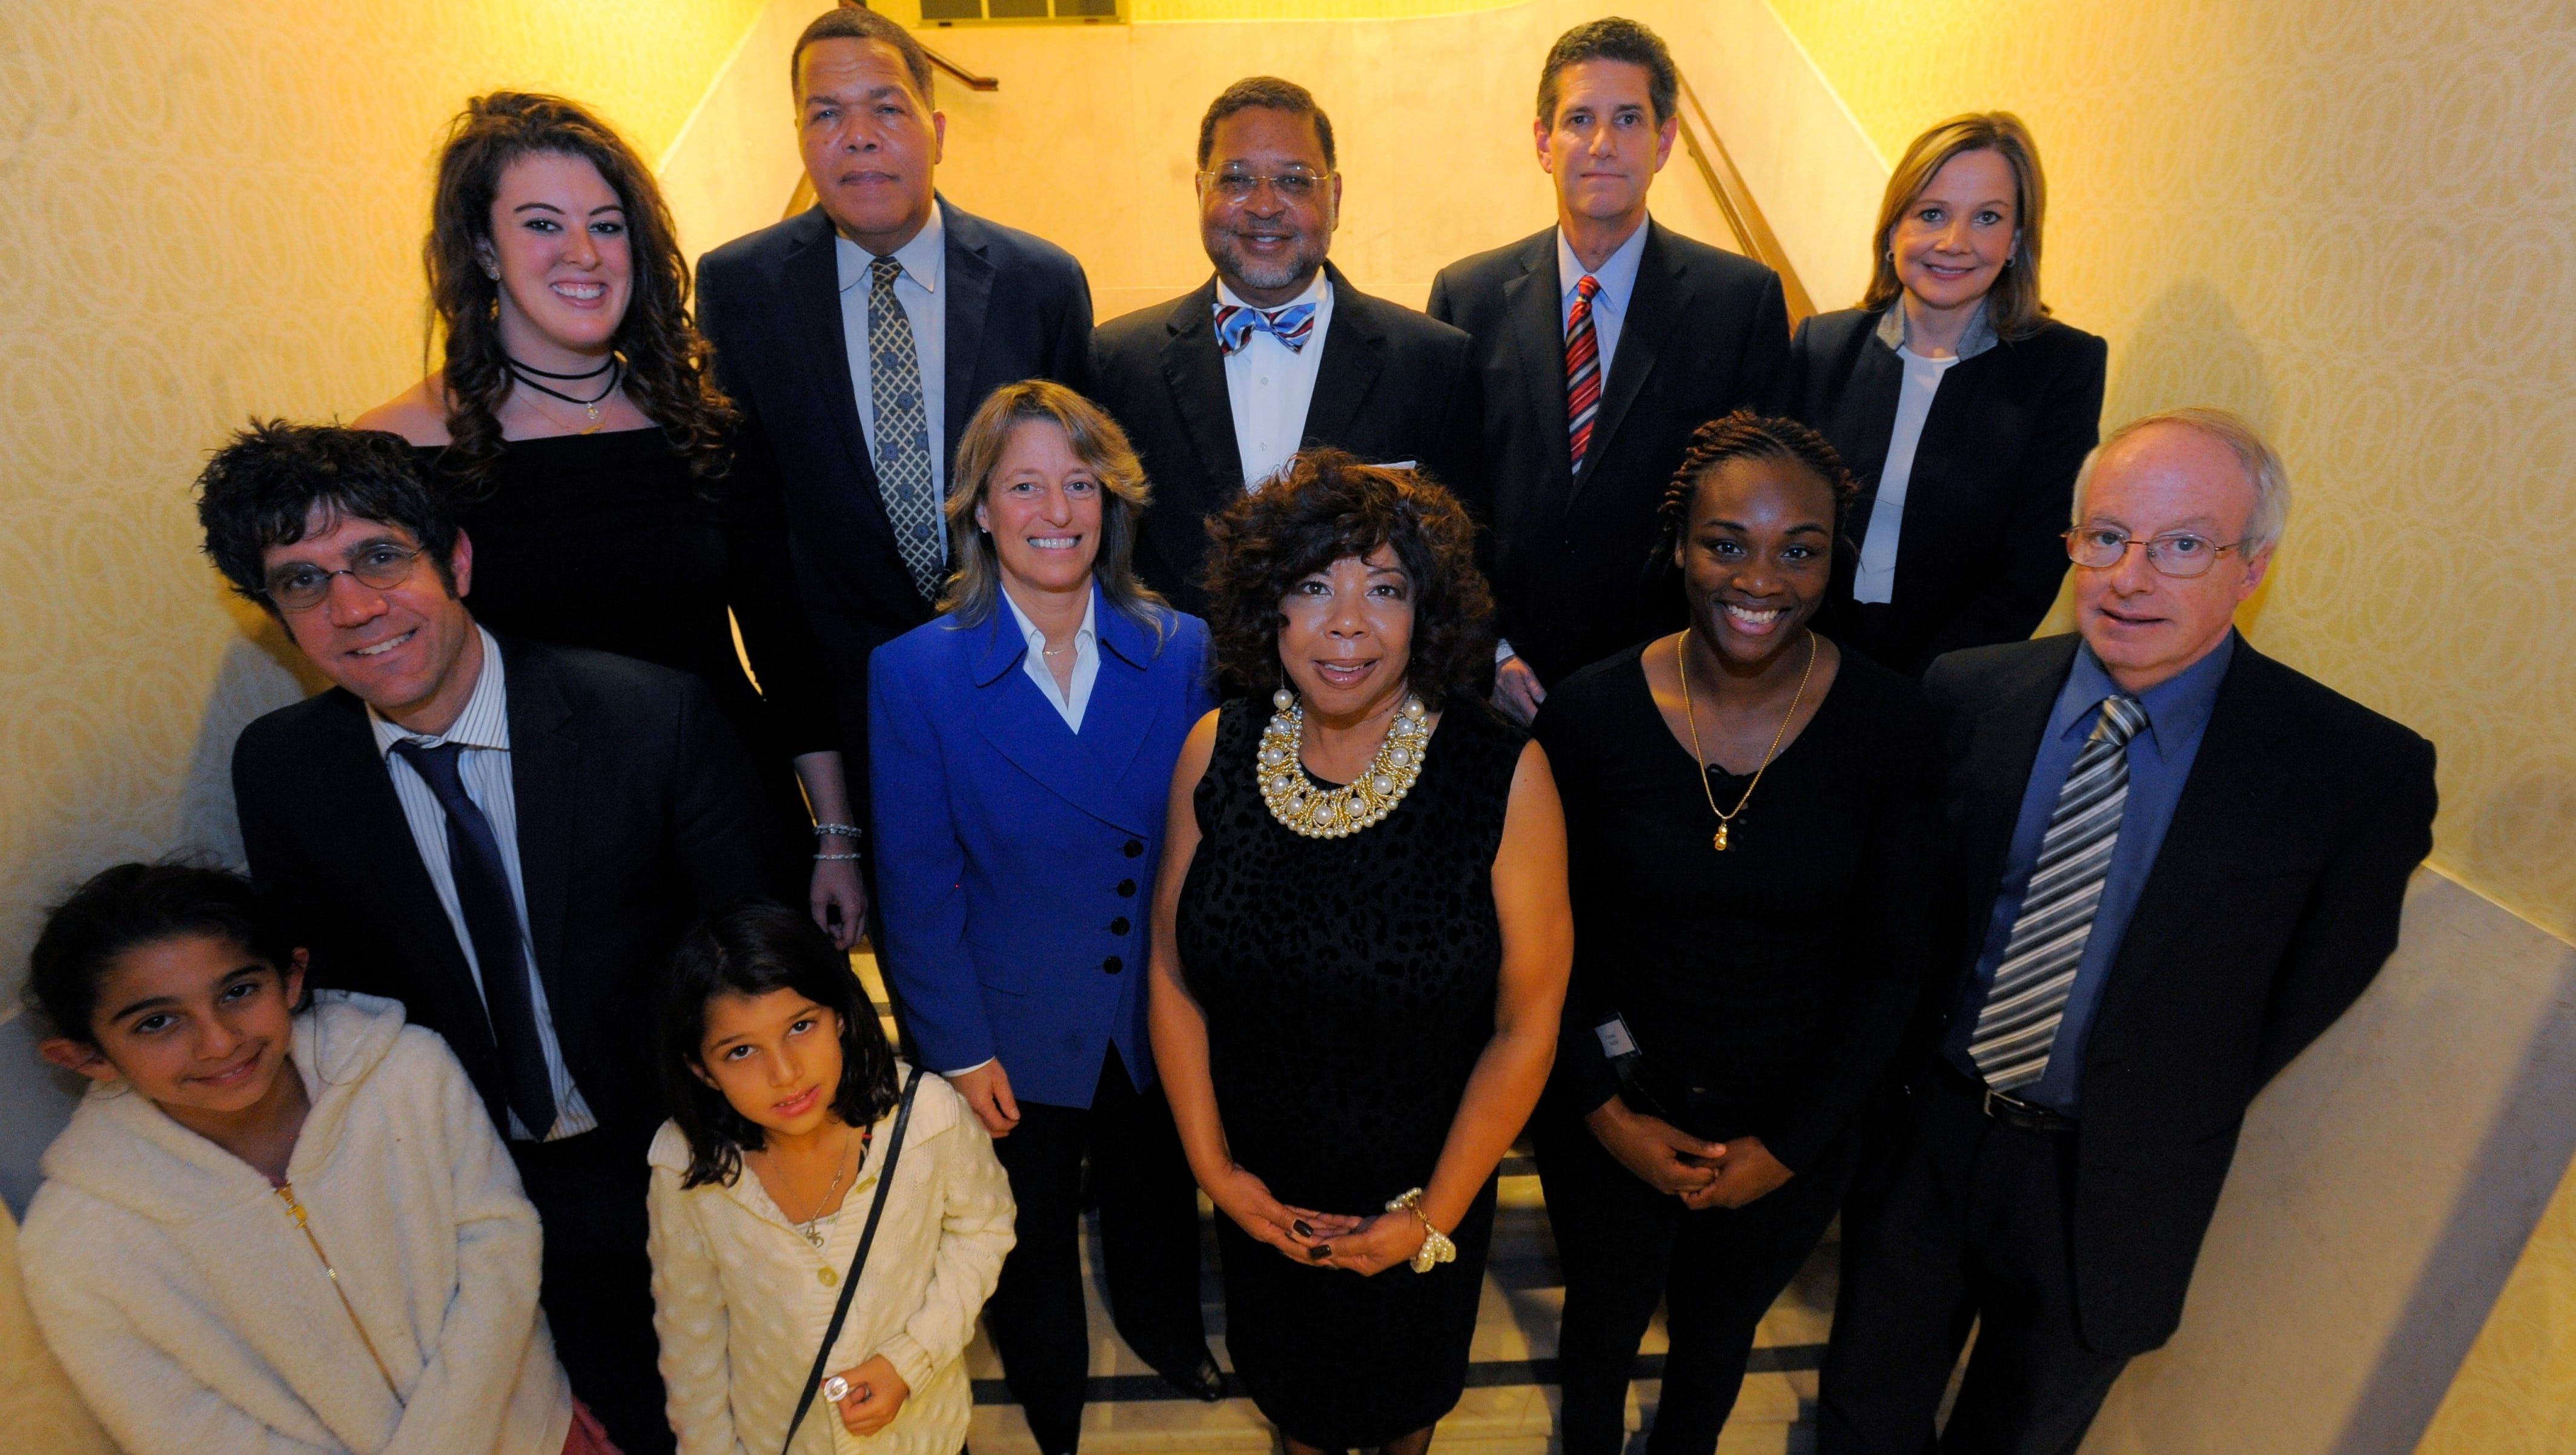 The 2016 Michiganians of the Year, honored at a Detroit News banquet on Nov. 30, 2016, are: Bottom row: Dr. Elliott Attisha representing Dr. Mona Hanna-Attisha with daughters Nina, 10, and Layla, 8, Linda Smith, Claressa Shields, David Moran. Second row: Allison Schmitt, Valerie Newman. Top row: Luther Keith, Chief Justice Robert P. Young Jr., Mark Davidoff and Mary T. Barra.